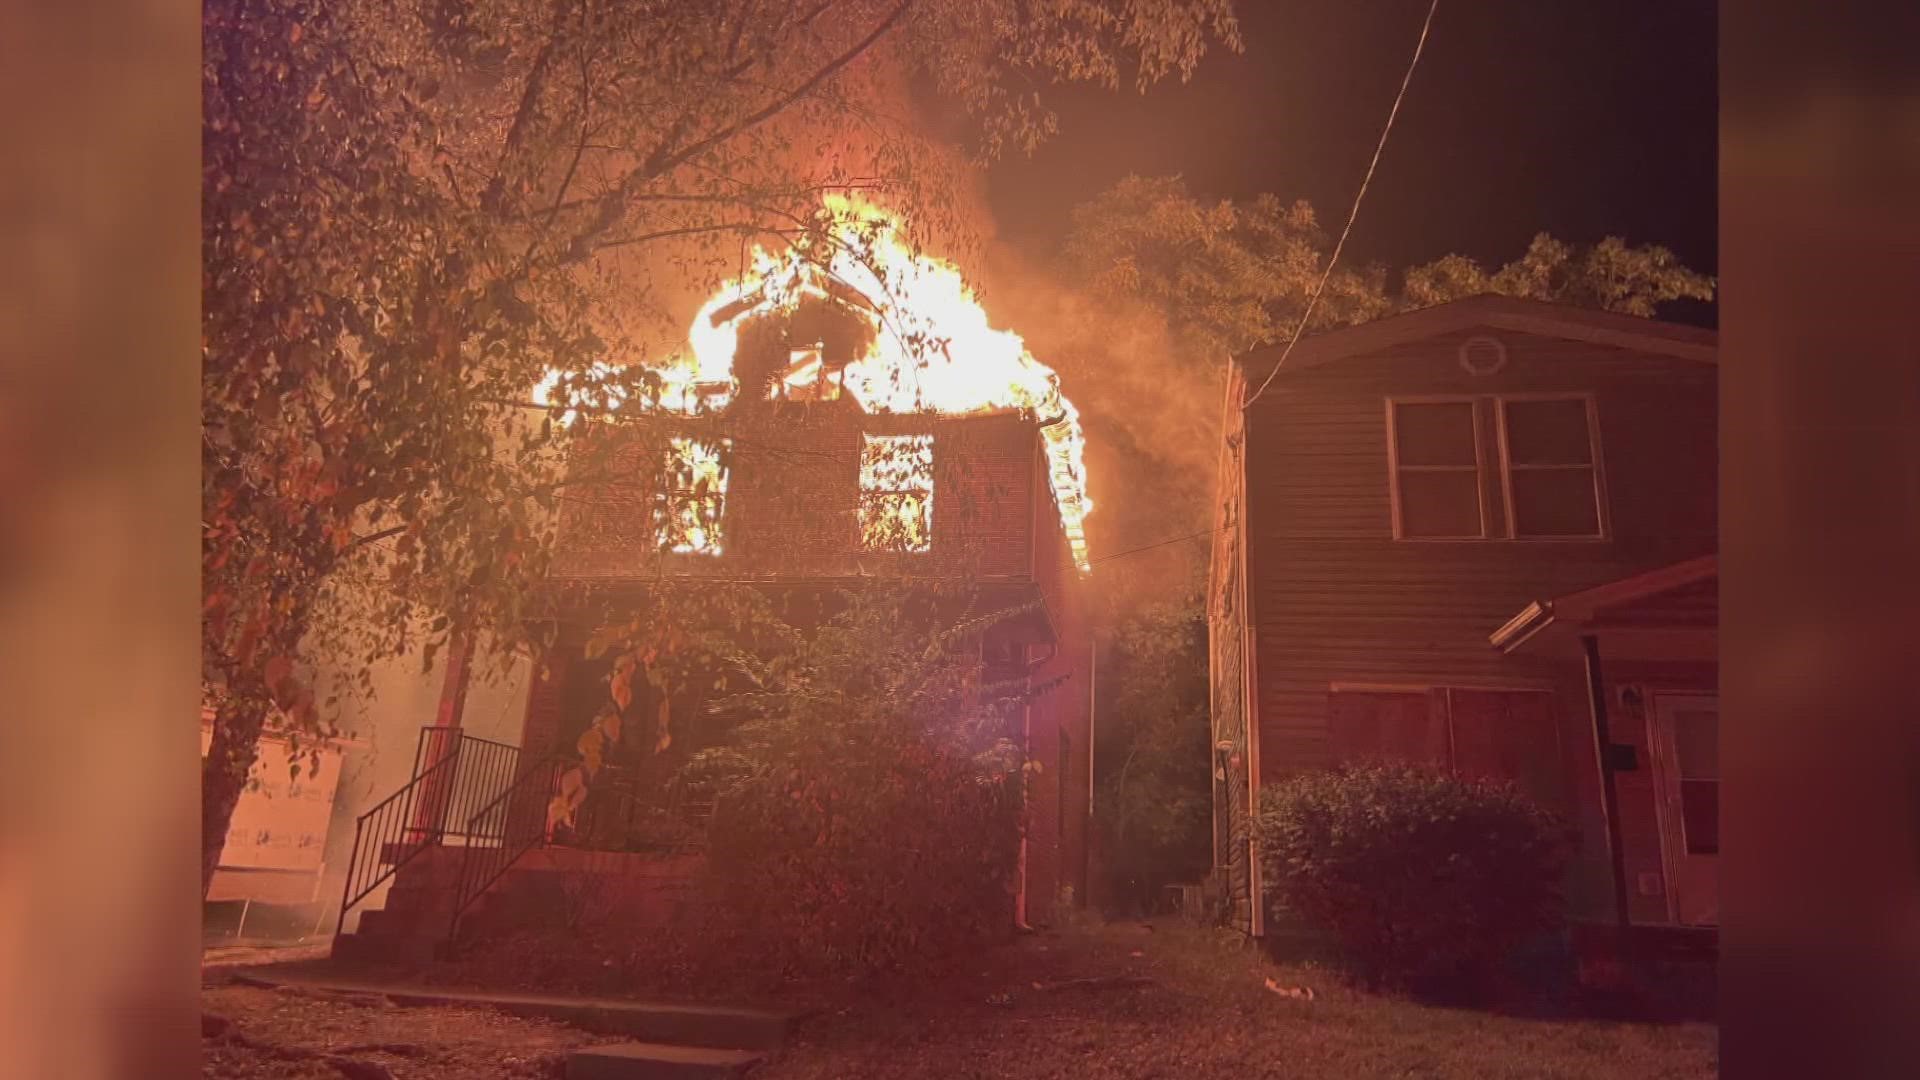 The Louisville Fire Department is looking into the causes of suspicious fires that happened in vacant homes for the past week.